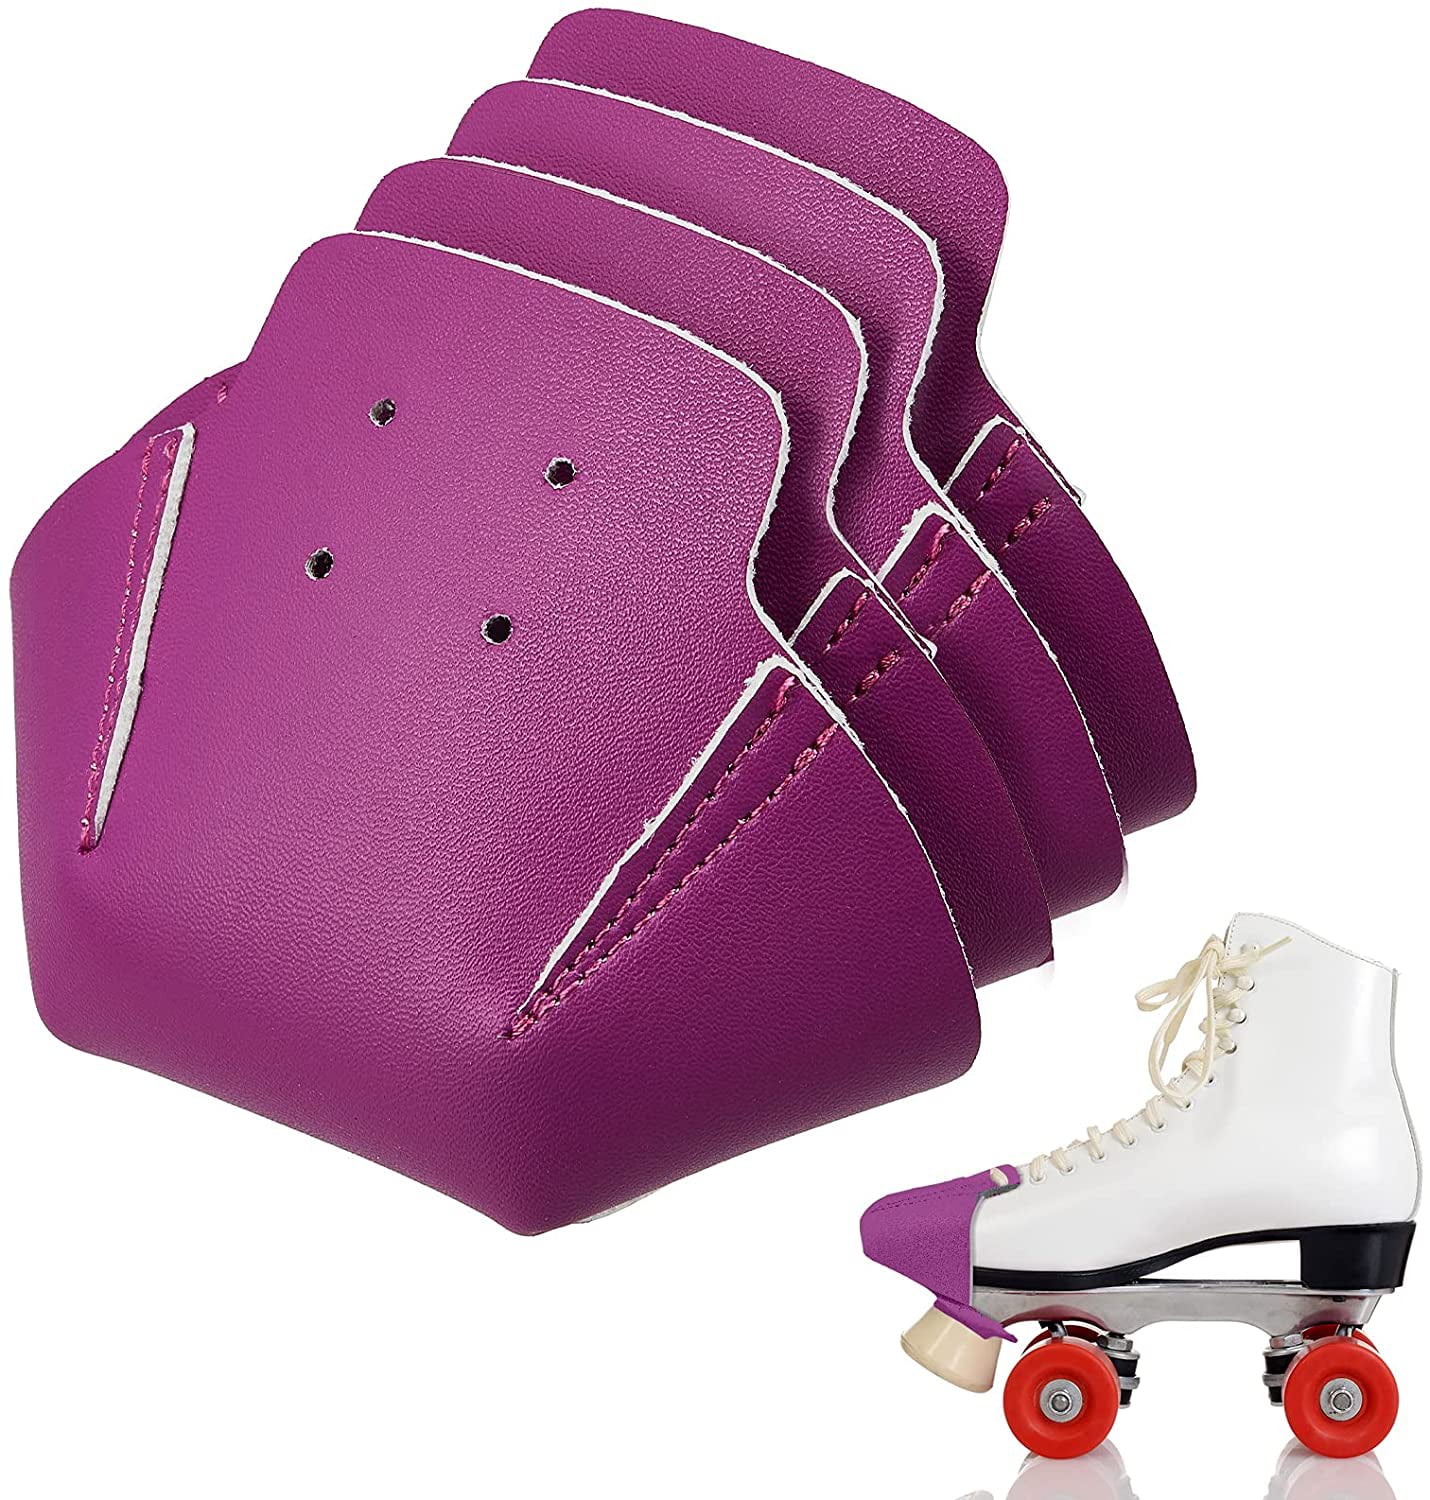 1Pcs Universal Roller Skates Toe Cover Skates Leather Tiptoe Cover Shoes  Protector Covers For Women Men Roller Skate Accessories - AliExpress